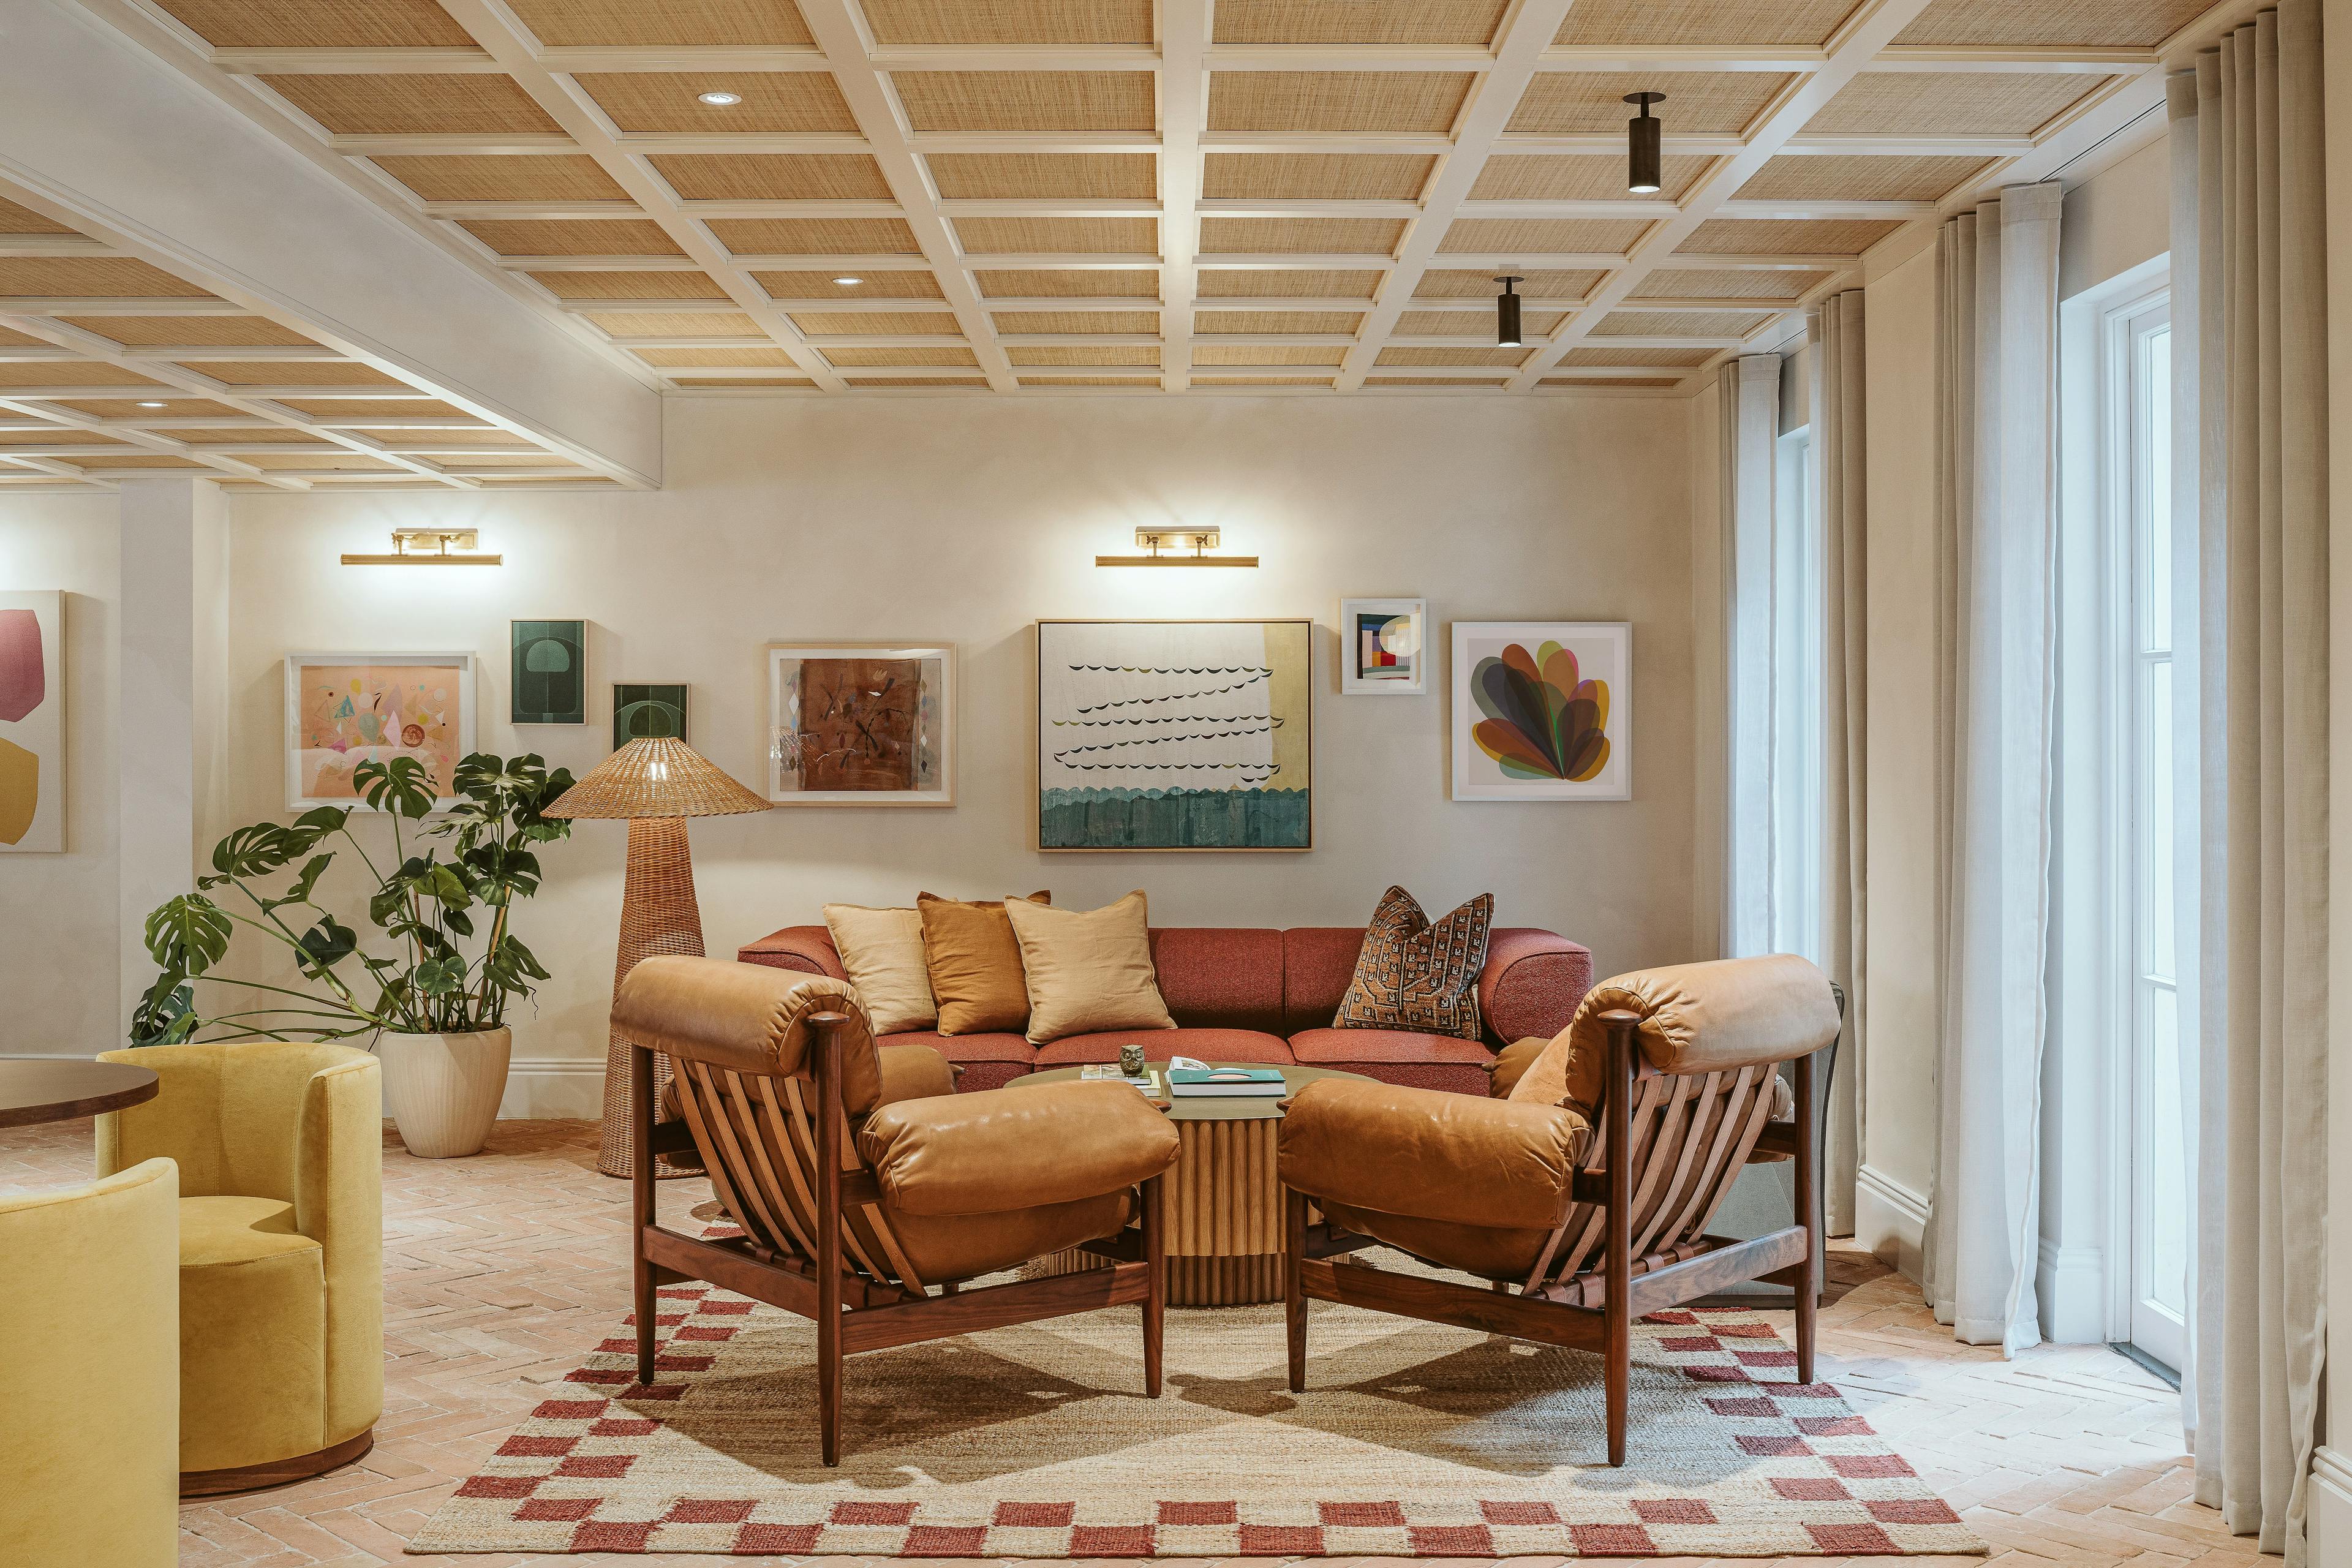 A lounge area at the Chief London clubhouse with artwork by artists Kayla Plosz Antiel, Carla Weeks, Lydia Bassis, Liesl Pfeffer and Laura Berman installed on a white wall above an orange sofa.